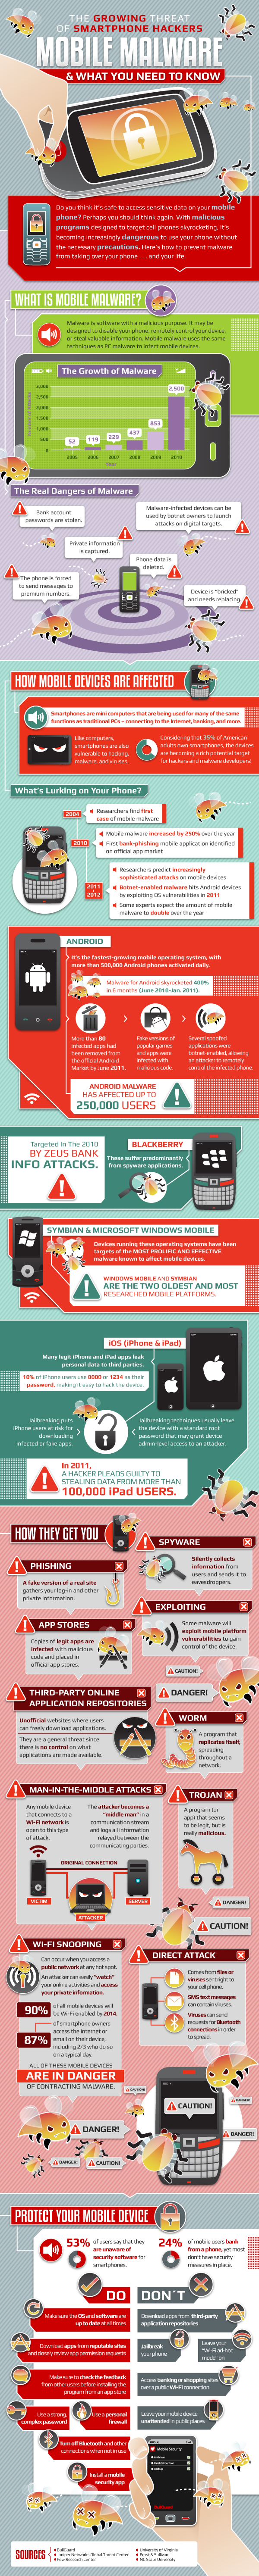 State of Mobile Malware [infographic]